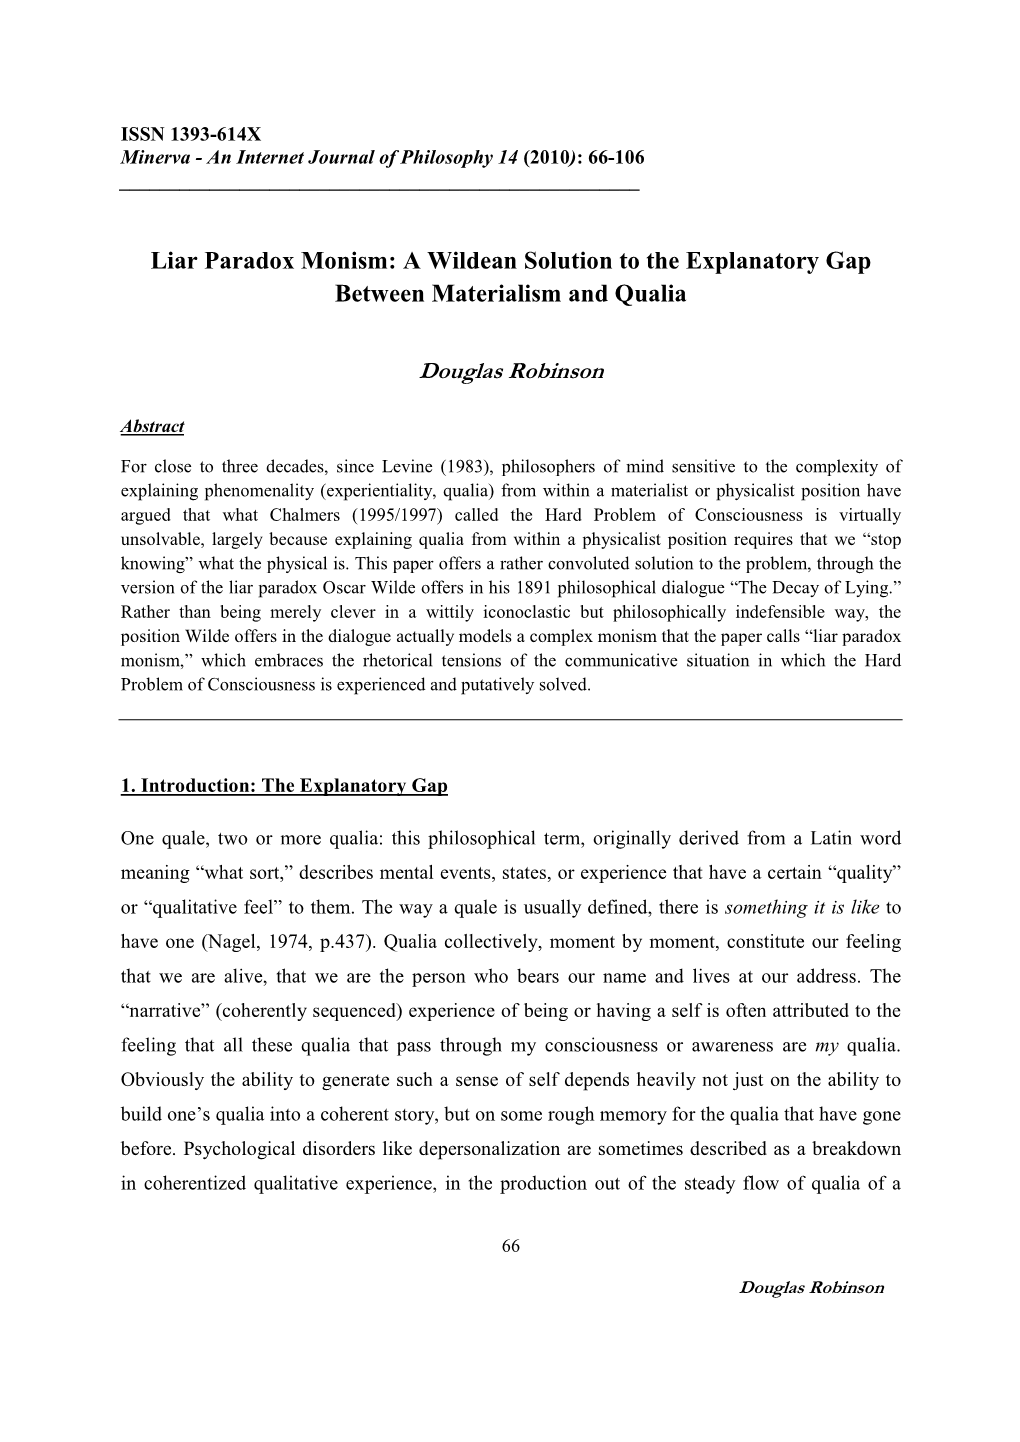 Liar Paradox Monism: a Wildean Solution to the Explanatory Gap Between Materialism and Qualia